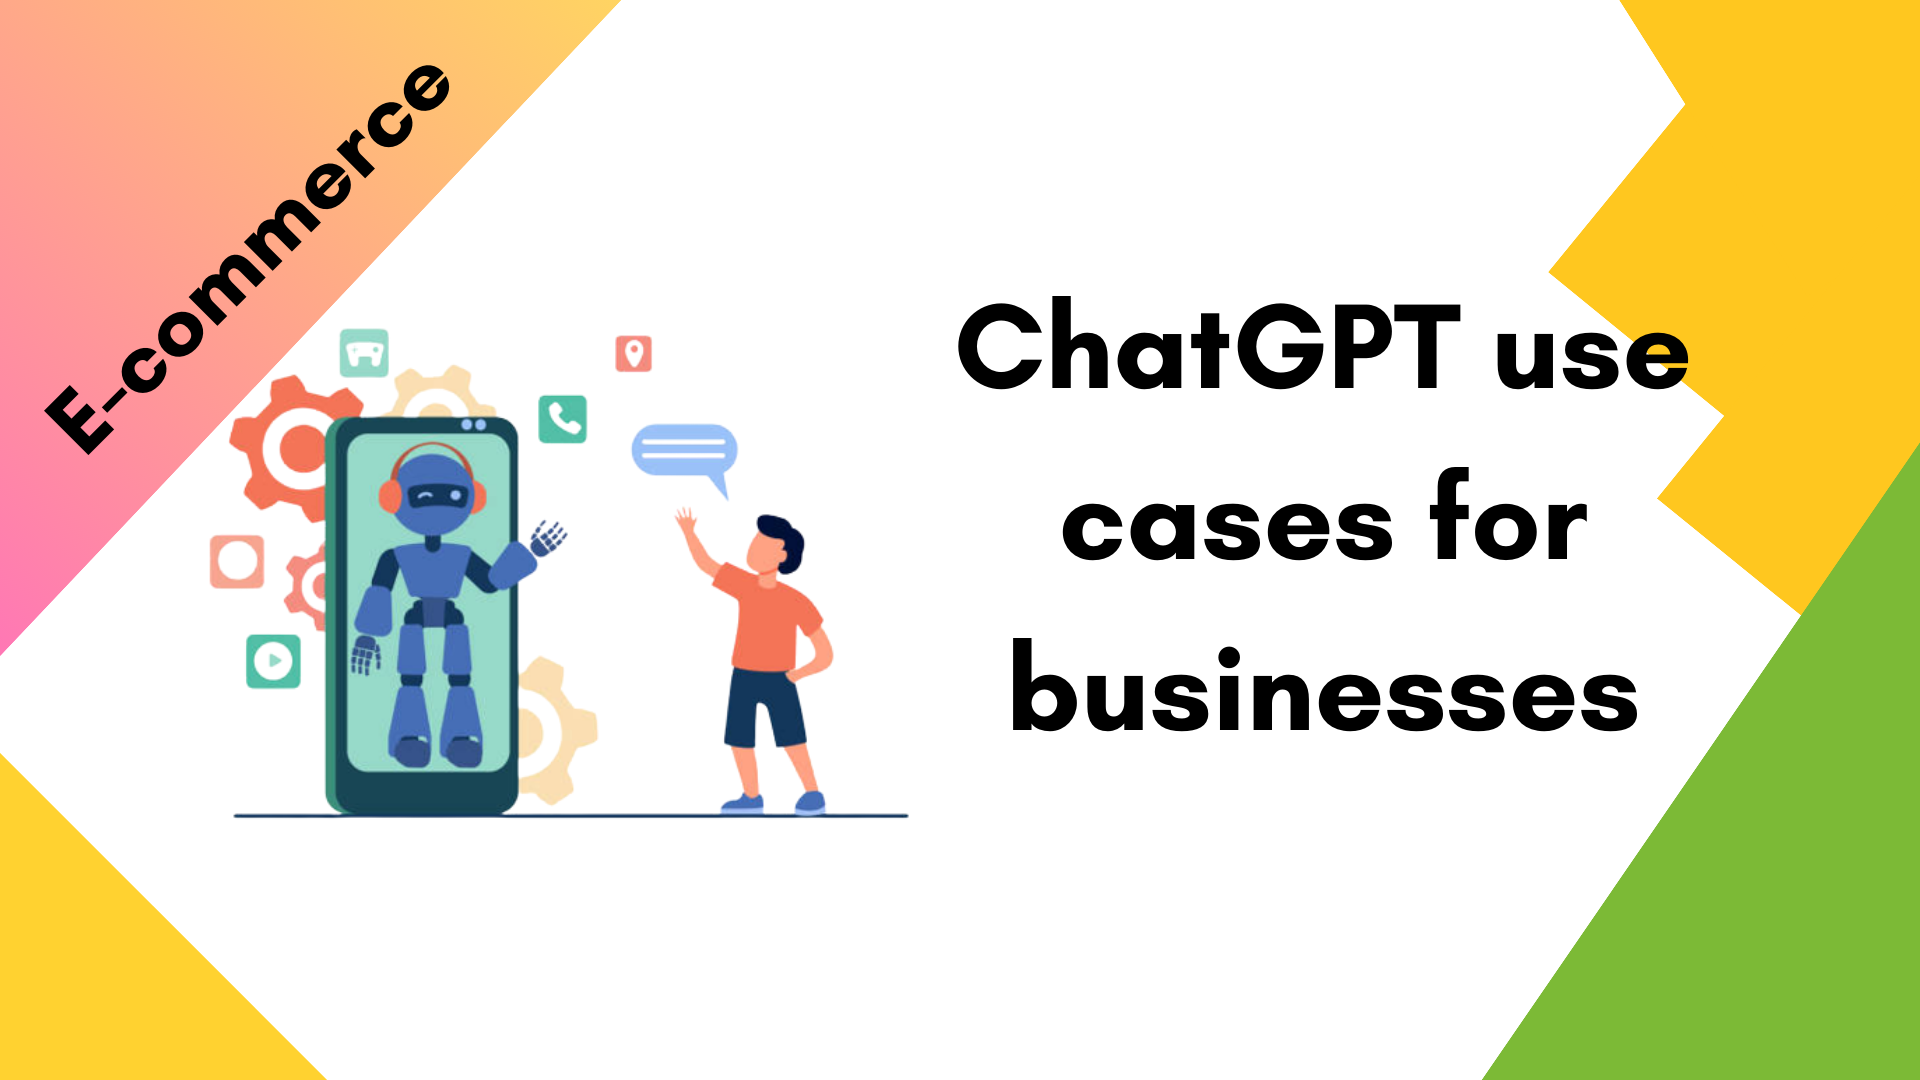 ChatGPT use cases for businesses